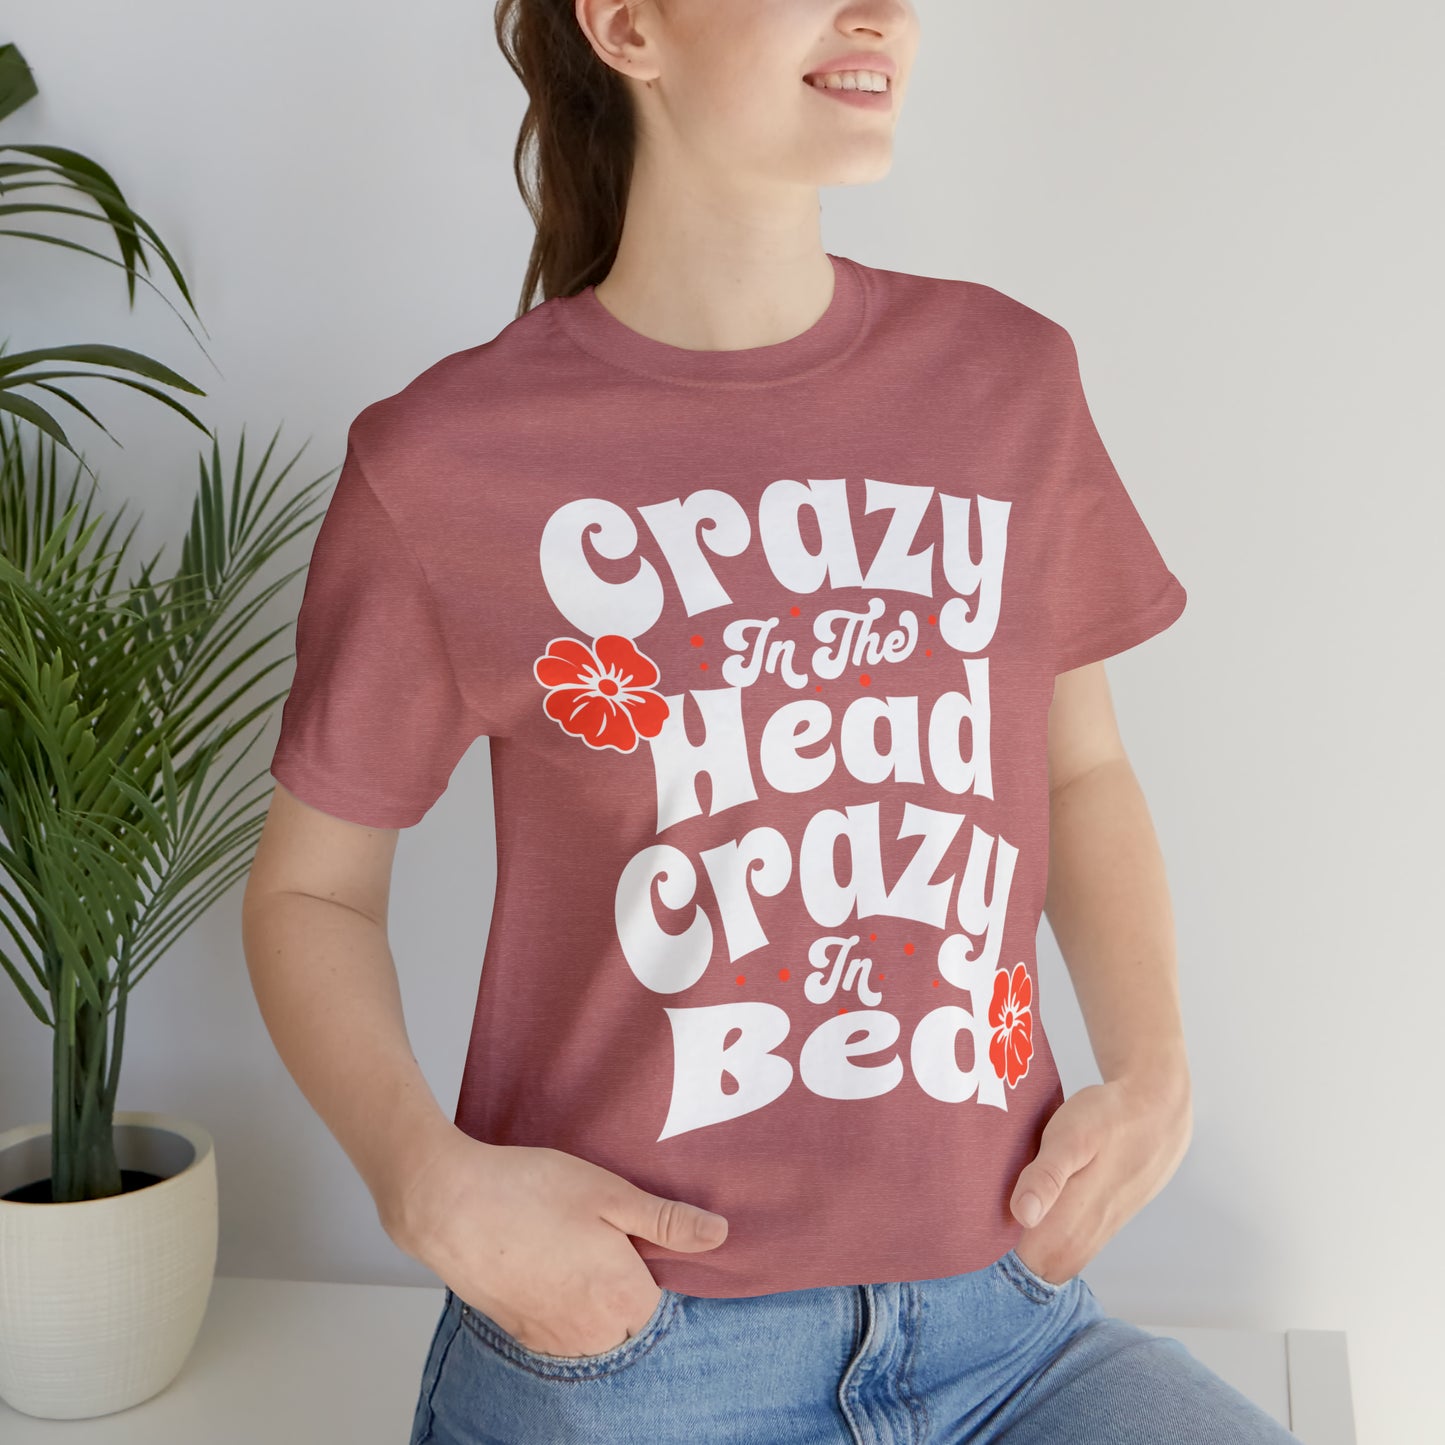 Crazy in the Head, Crazy in Bed Unisex Jersey Short Sleeve T-shirt